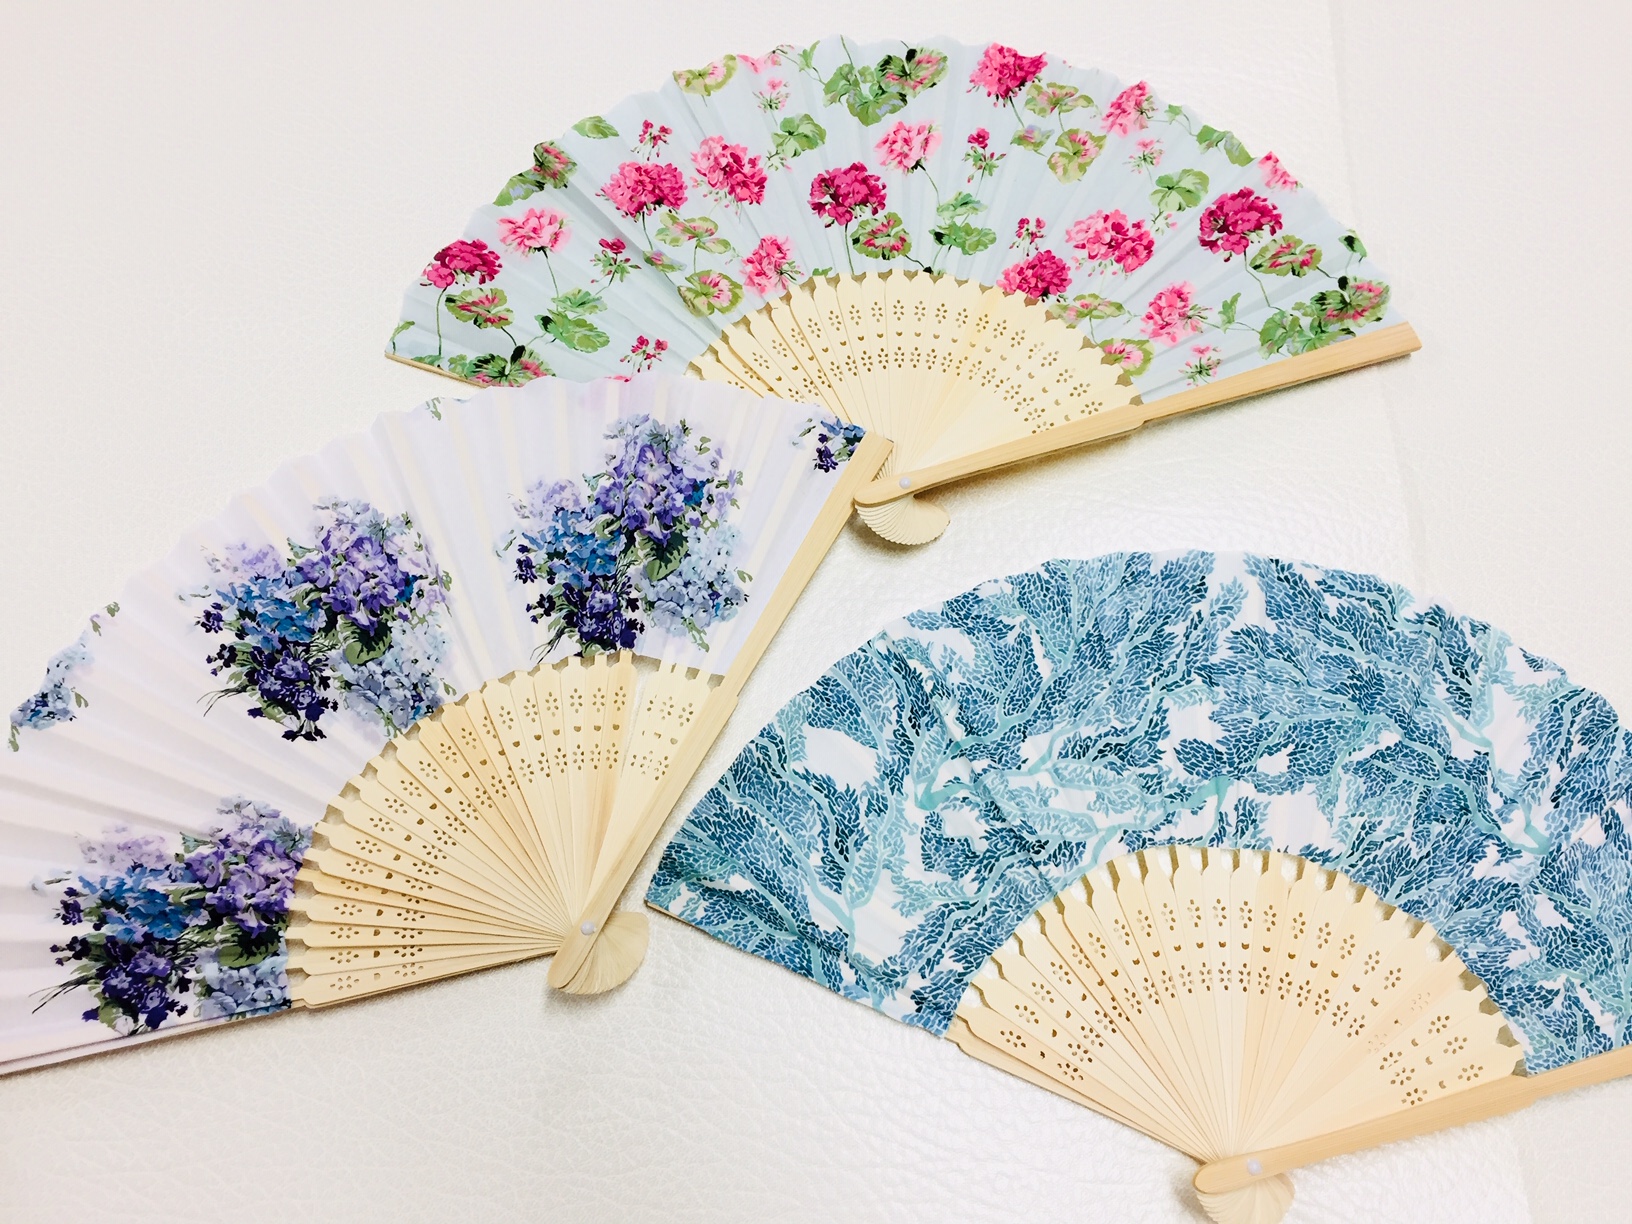 How To Make A Hand Fan With Fabric